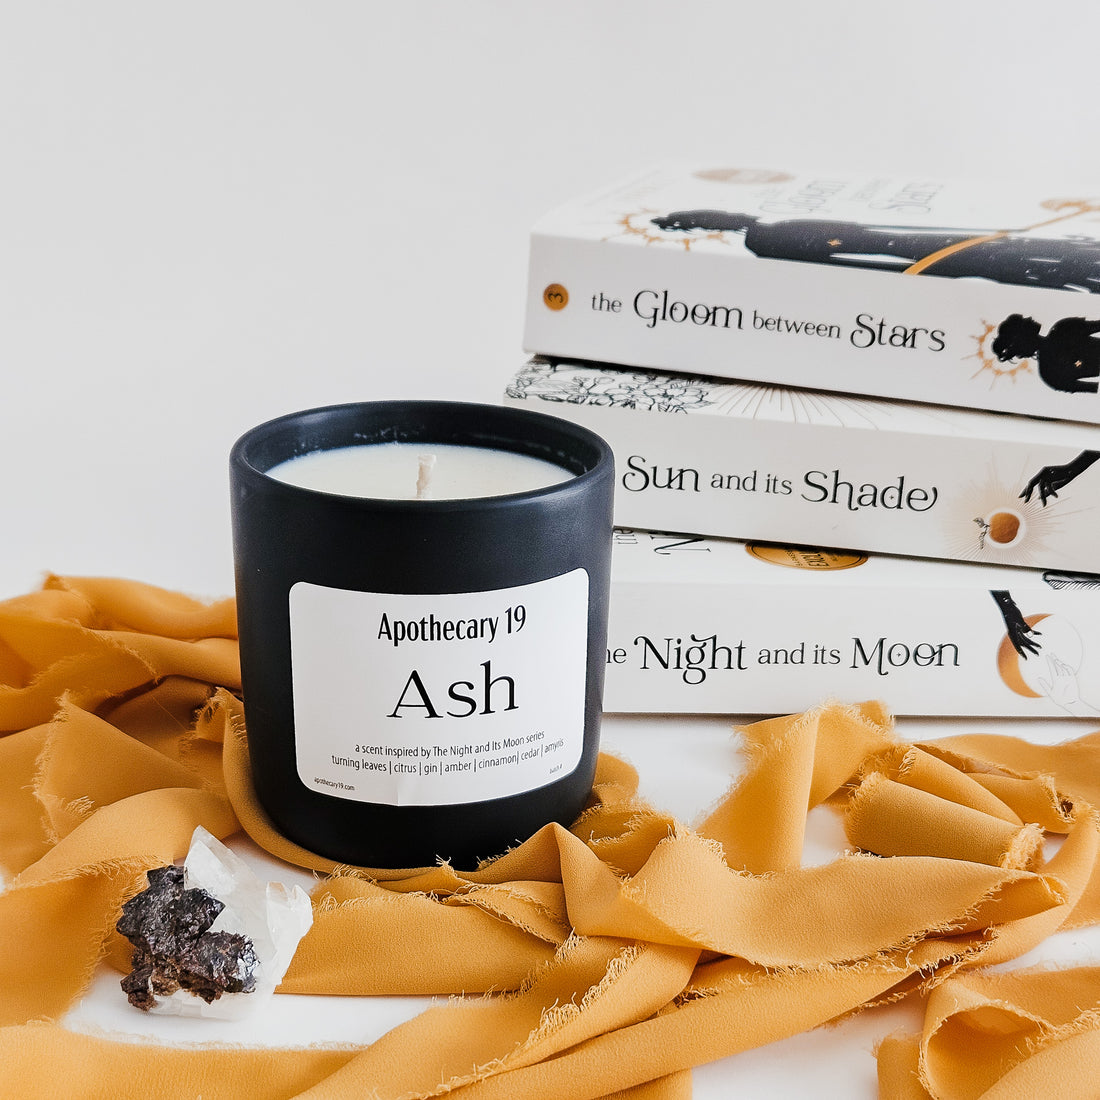 Ash — a scent inspired by The Night and Its Moon